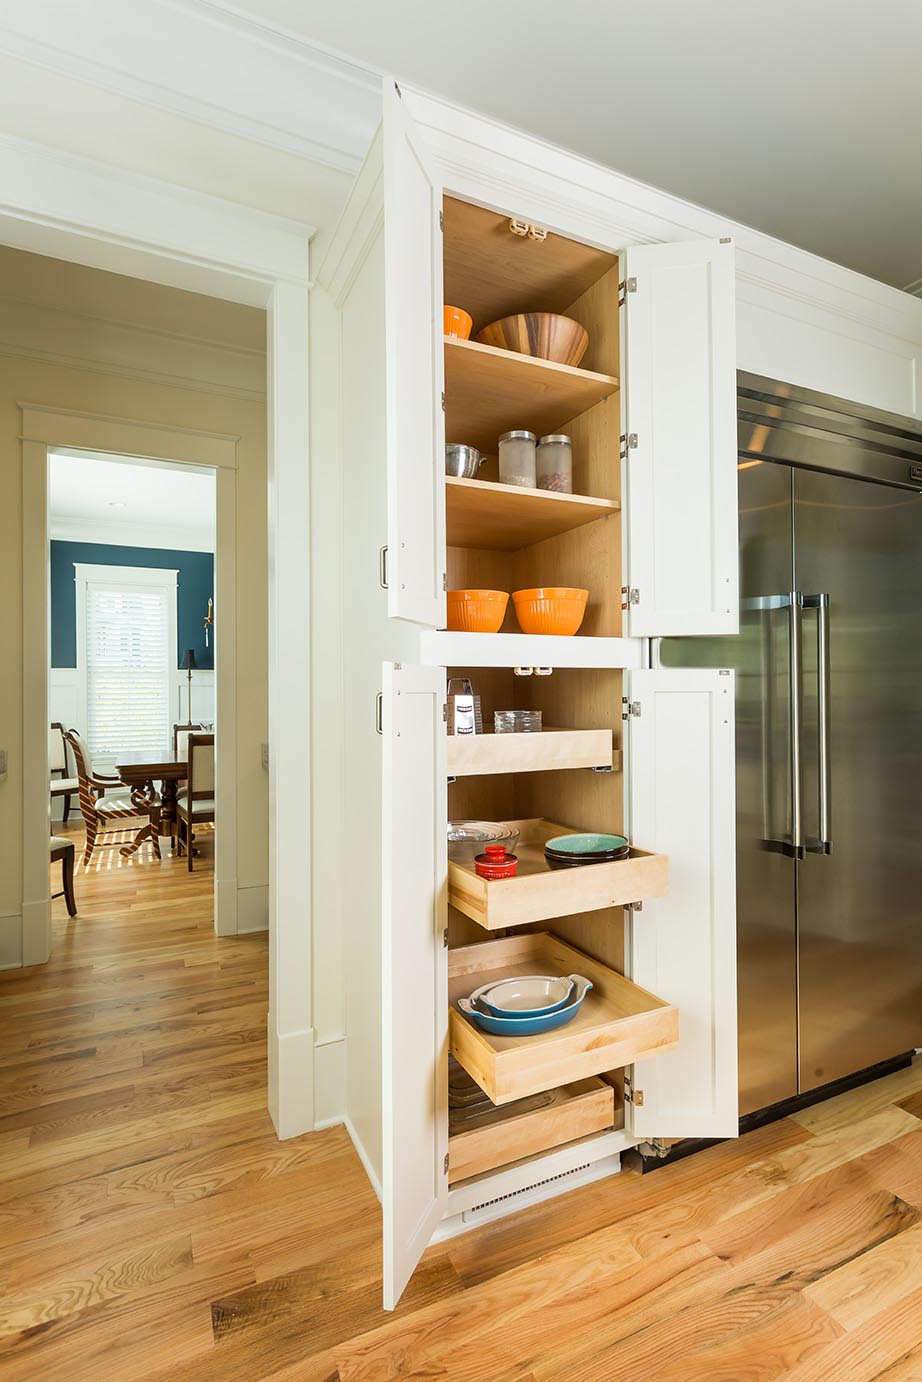 White Kitchen Cabinet Drawers
 Luxury South Carolina Home features Inset Shaker Cabinets